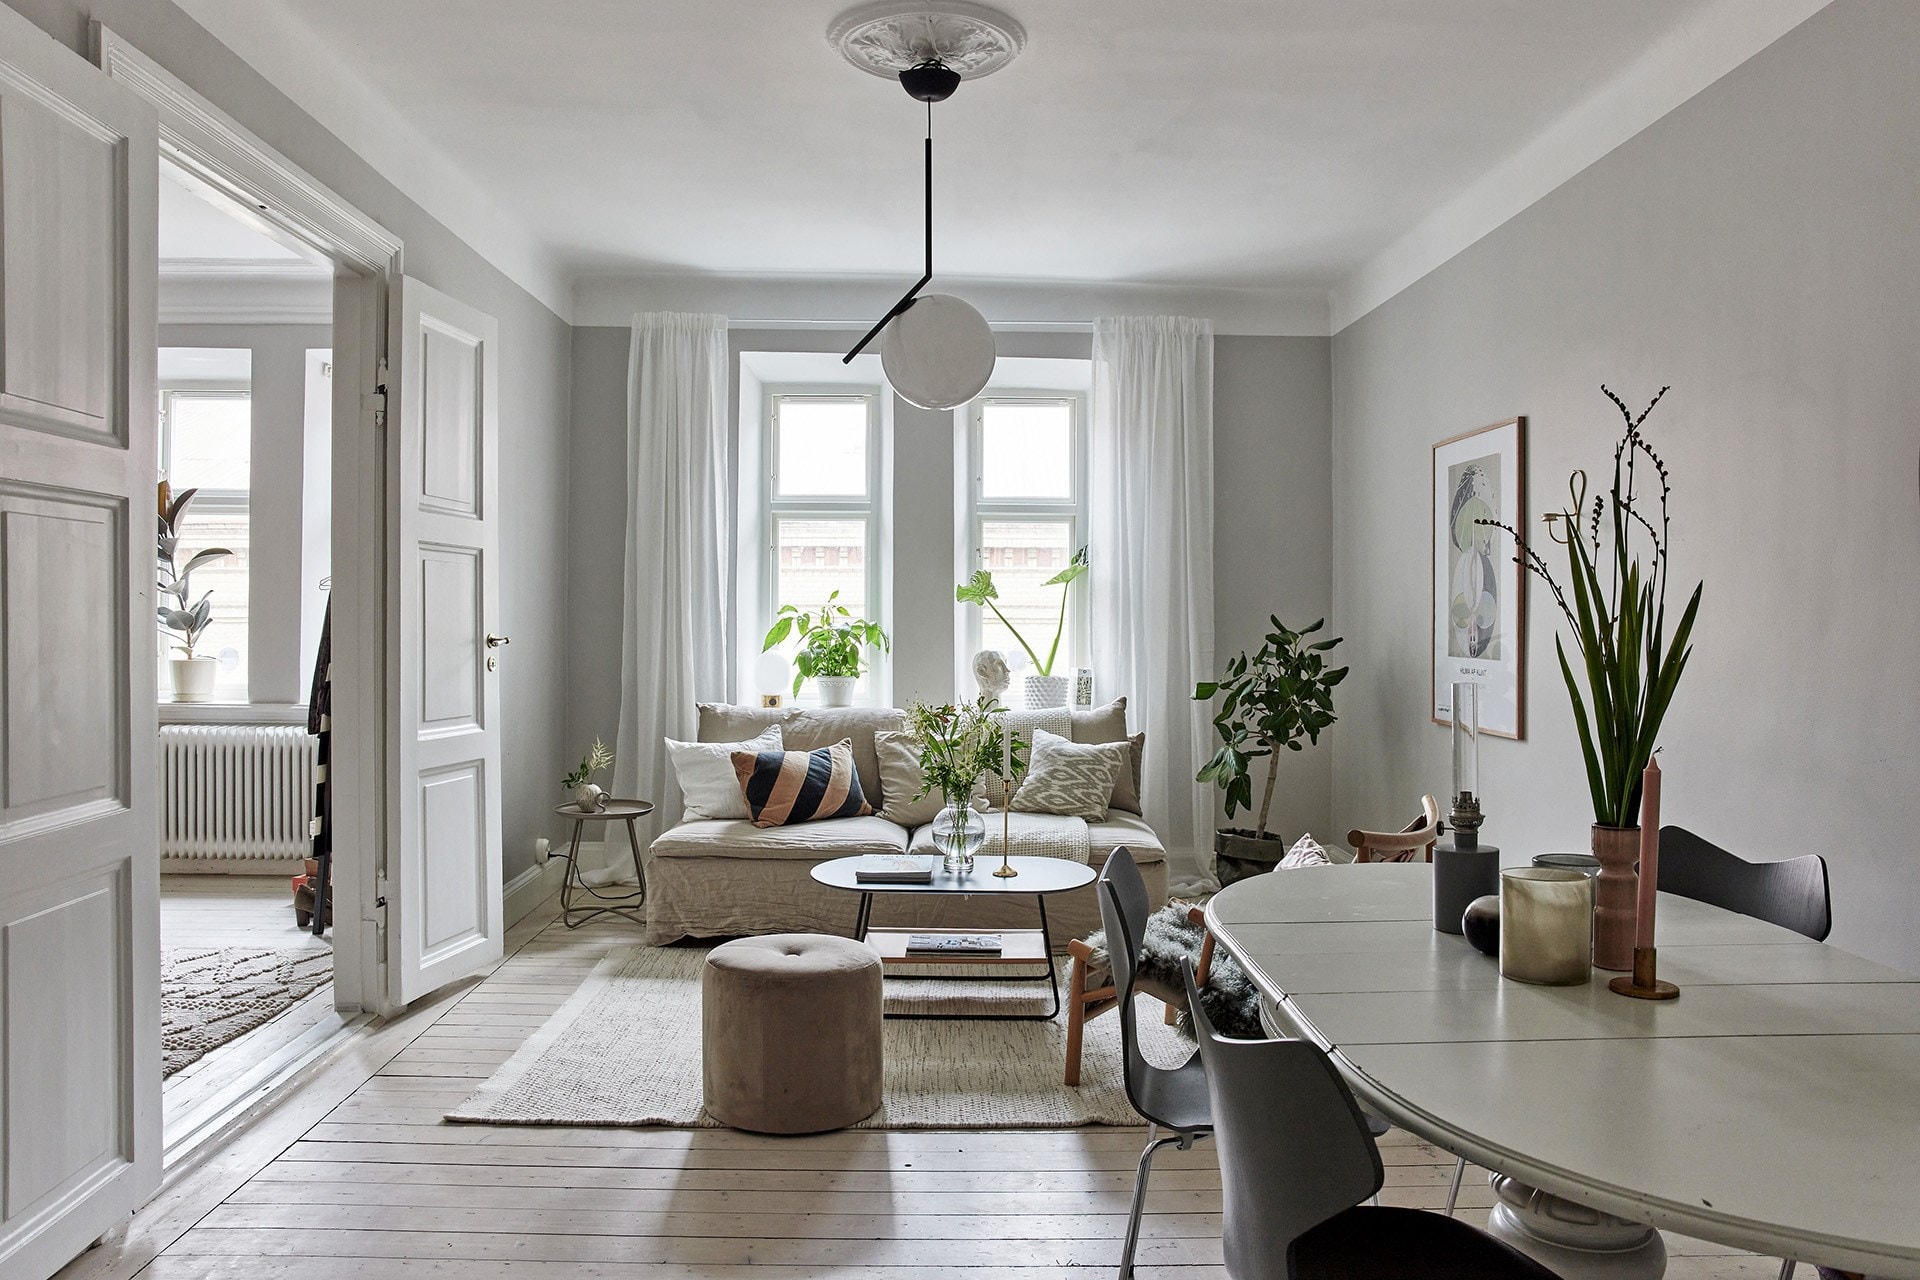 Turn of the century home with beautiful accessories - COCO LAPINE ...